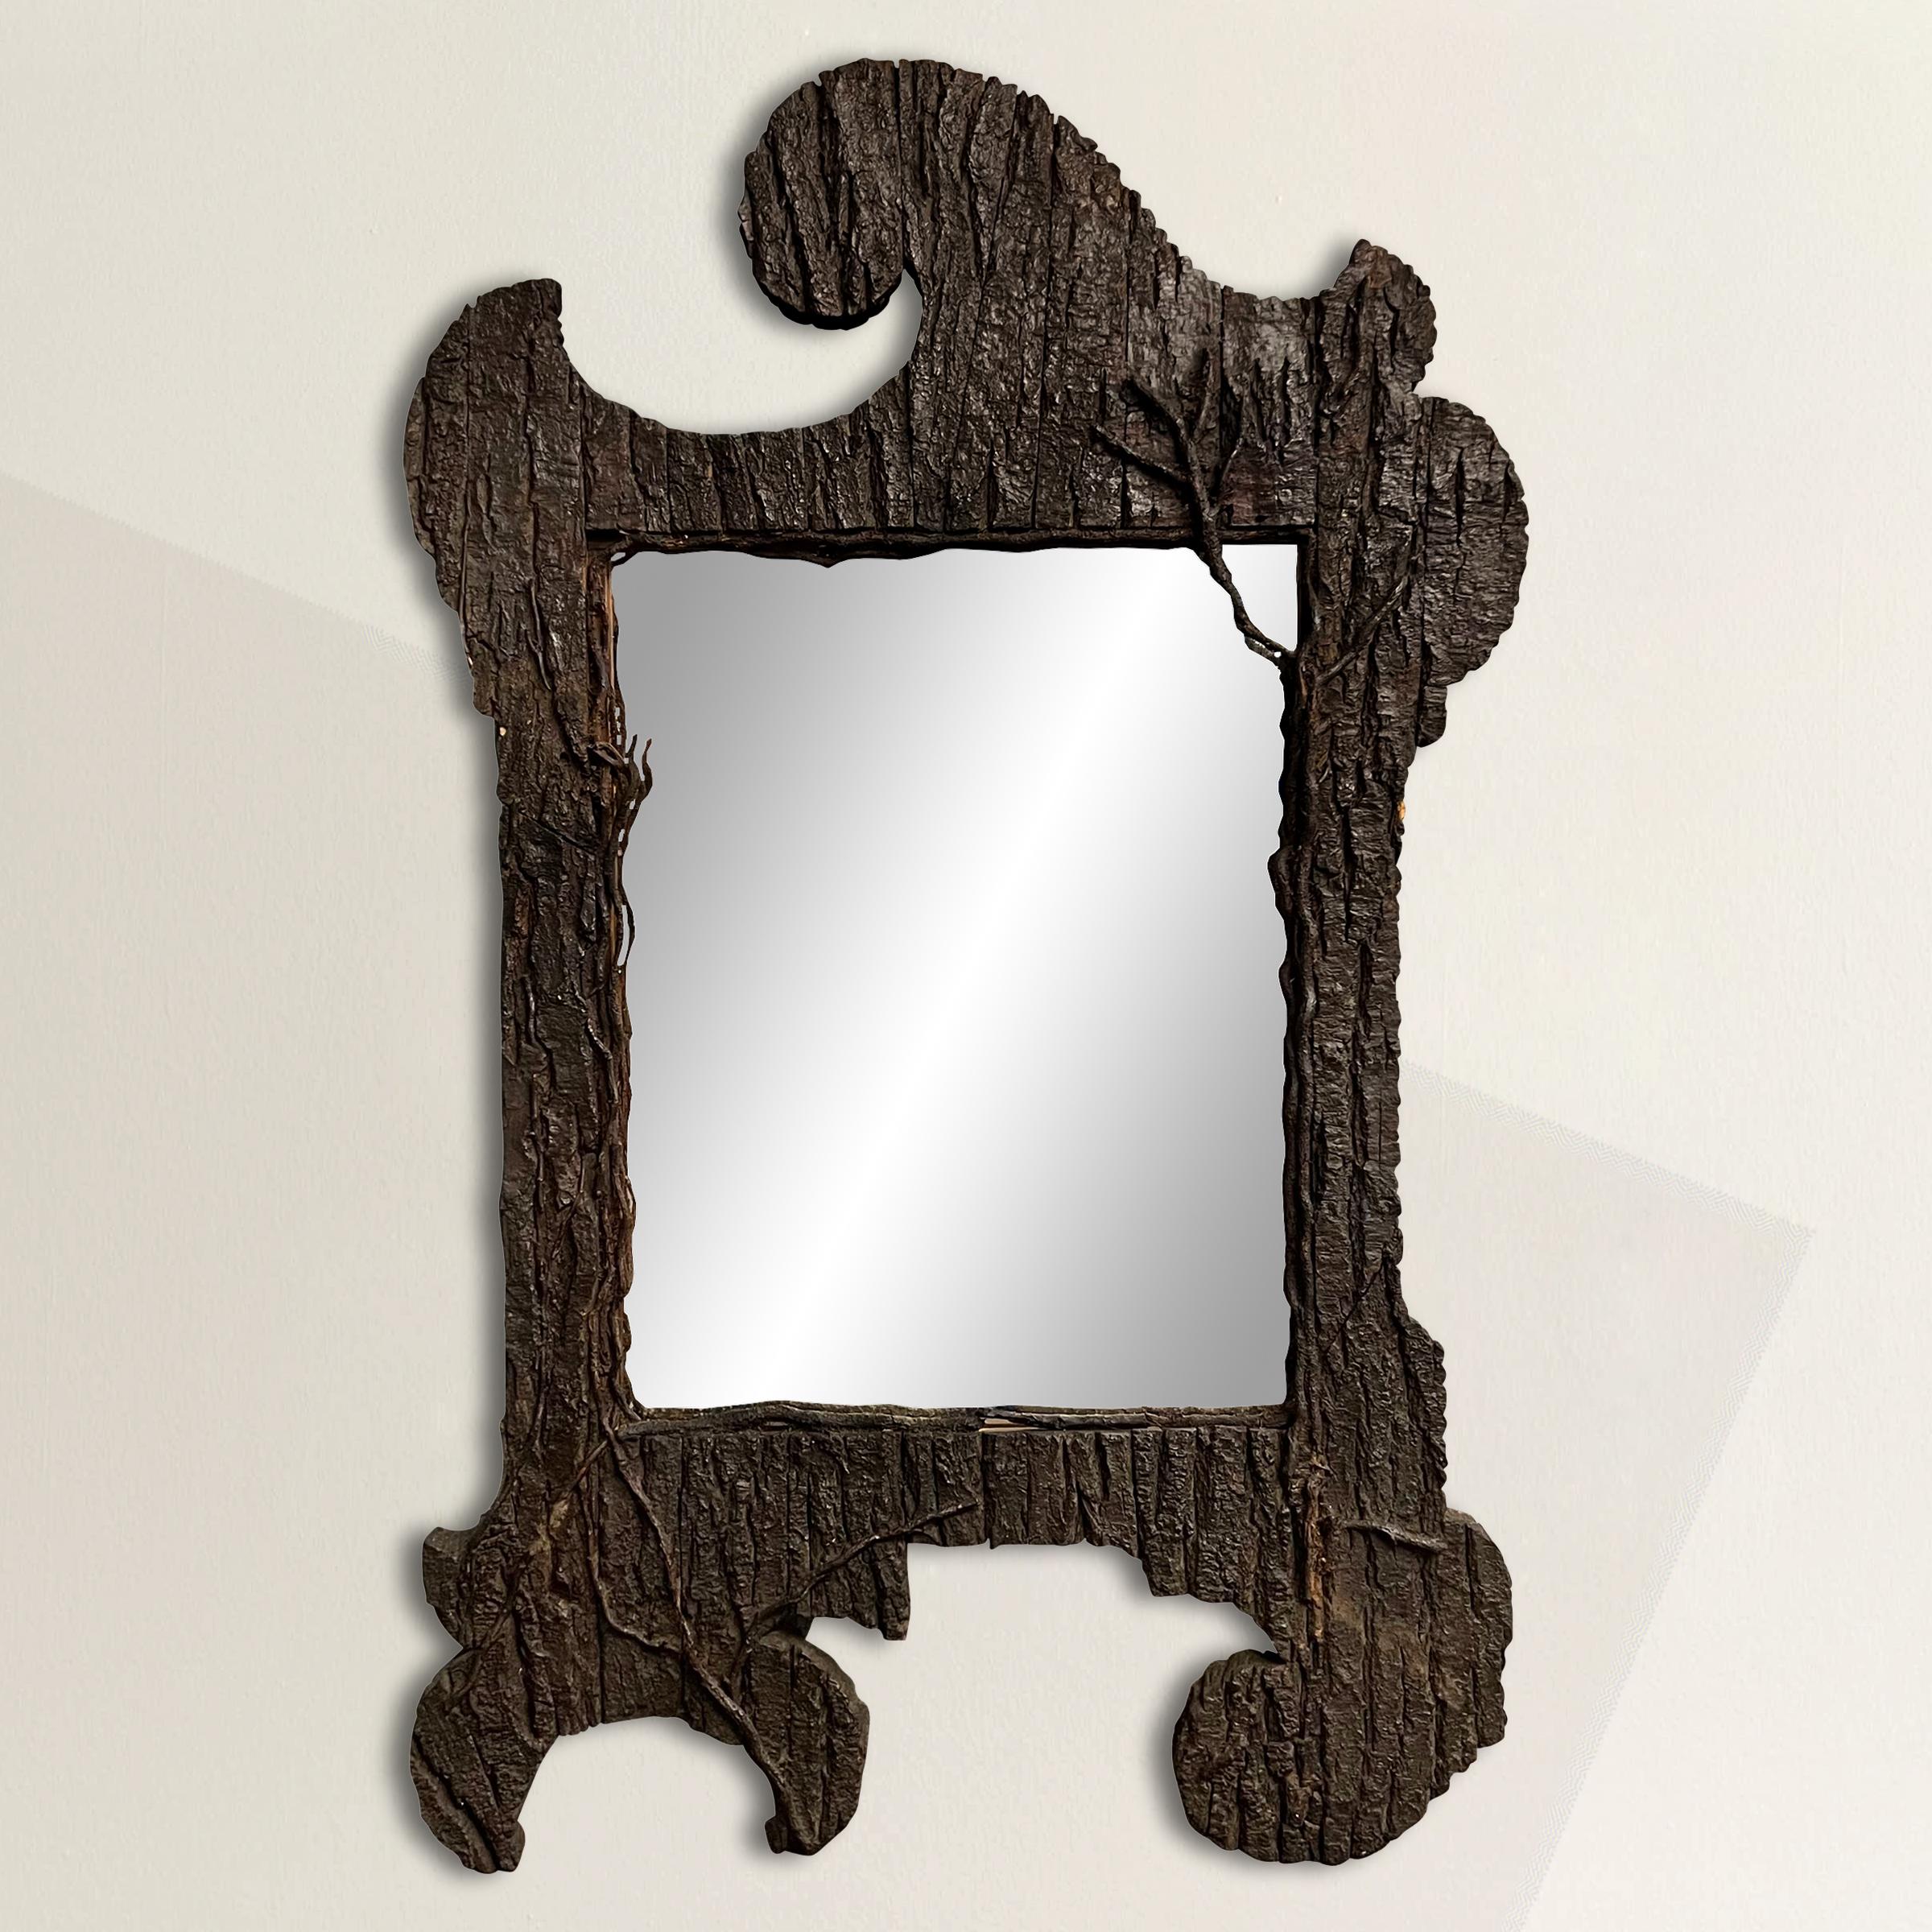 This exquisite early 20th-century Italian bark framed mirror embodies the charm and elegance of a bygone era. Custom made for a Tyrolean ski chalet in 1907, it exudes a rustic yet refined aesthetic that seamlessly blends into any style interior. The